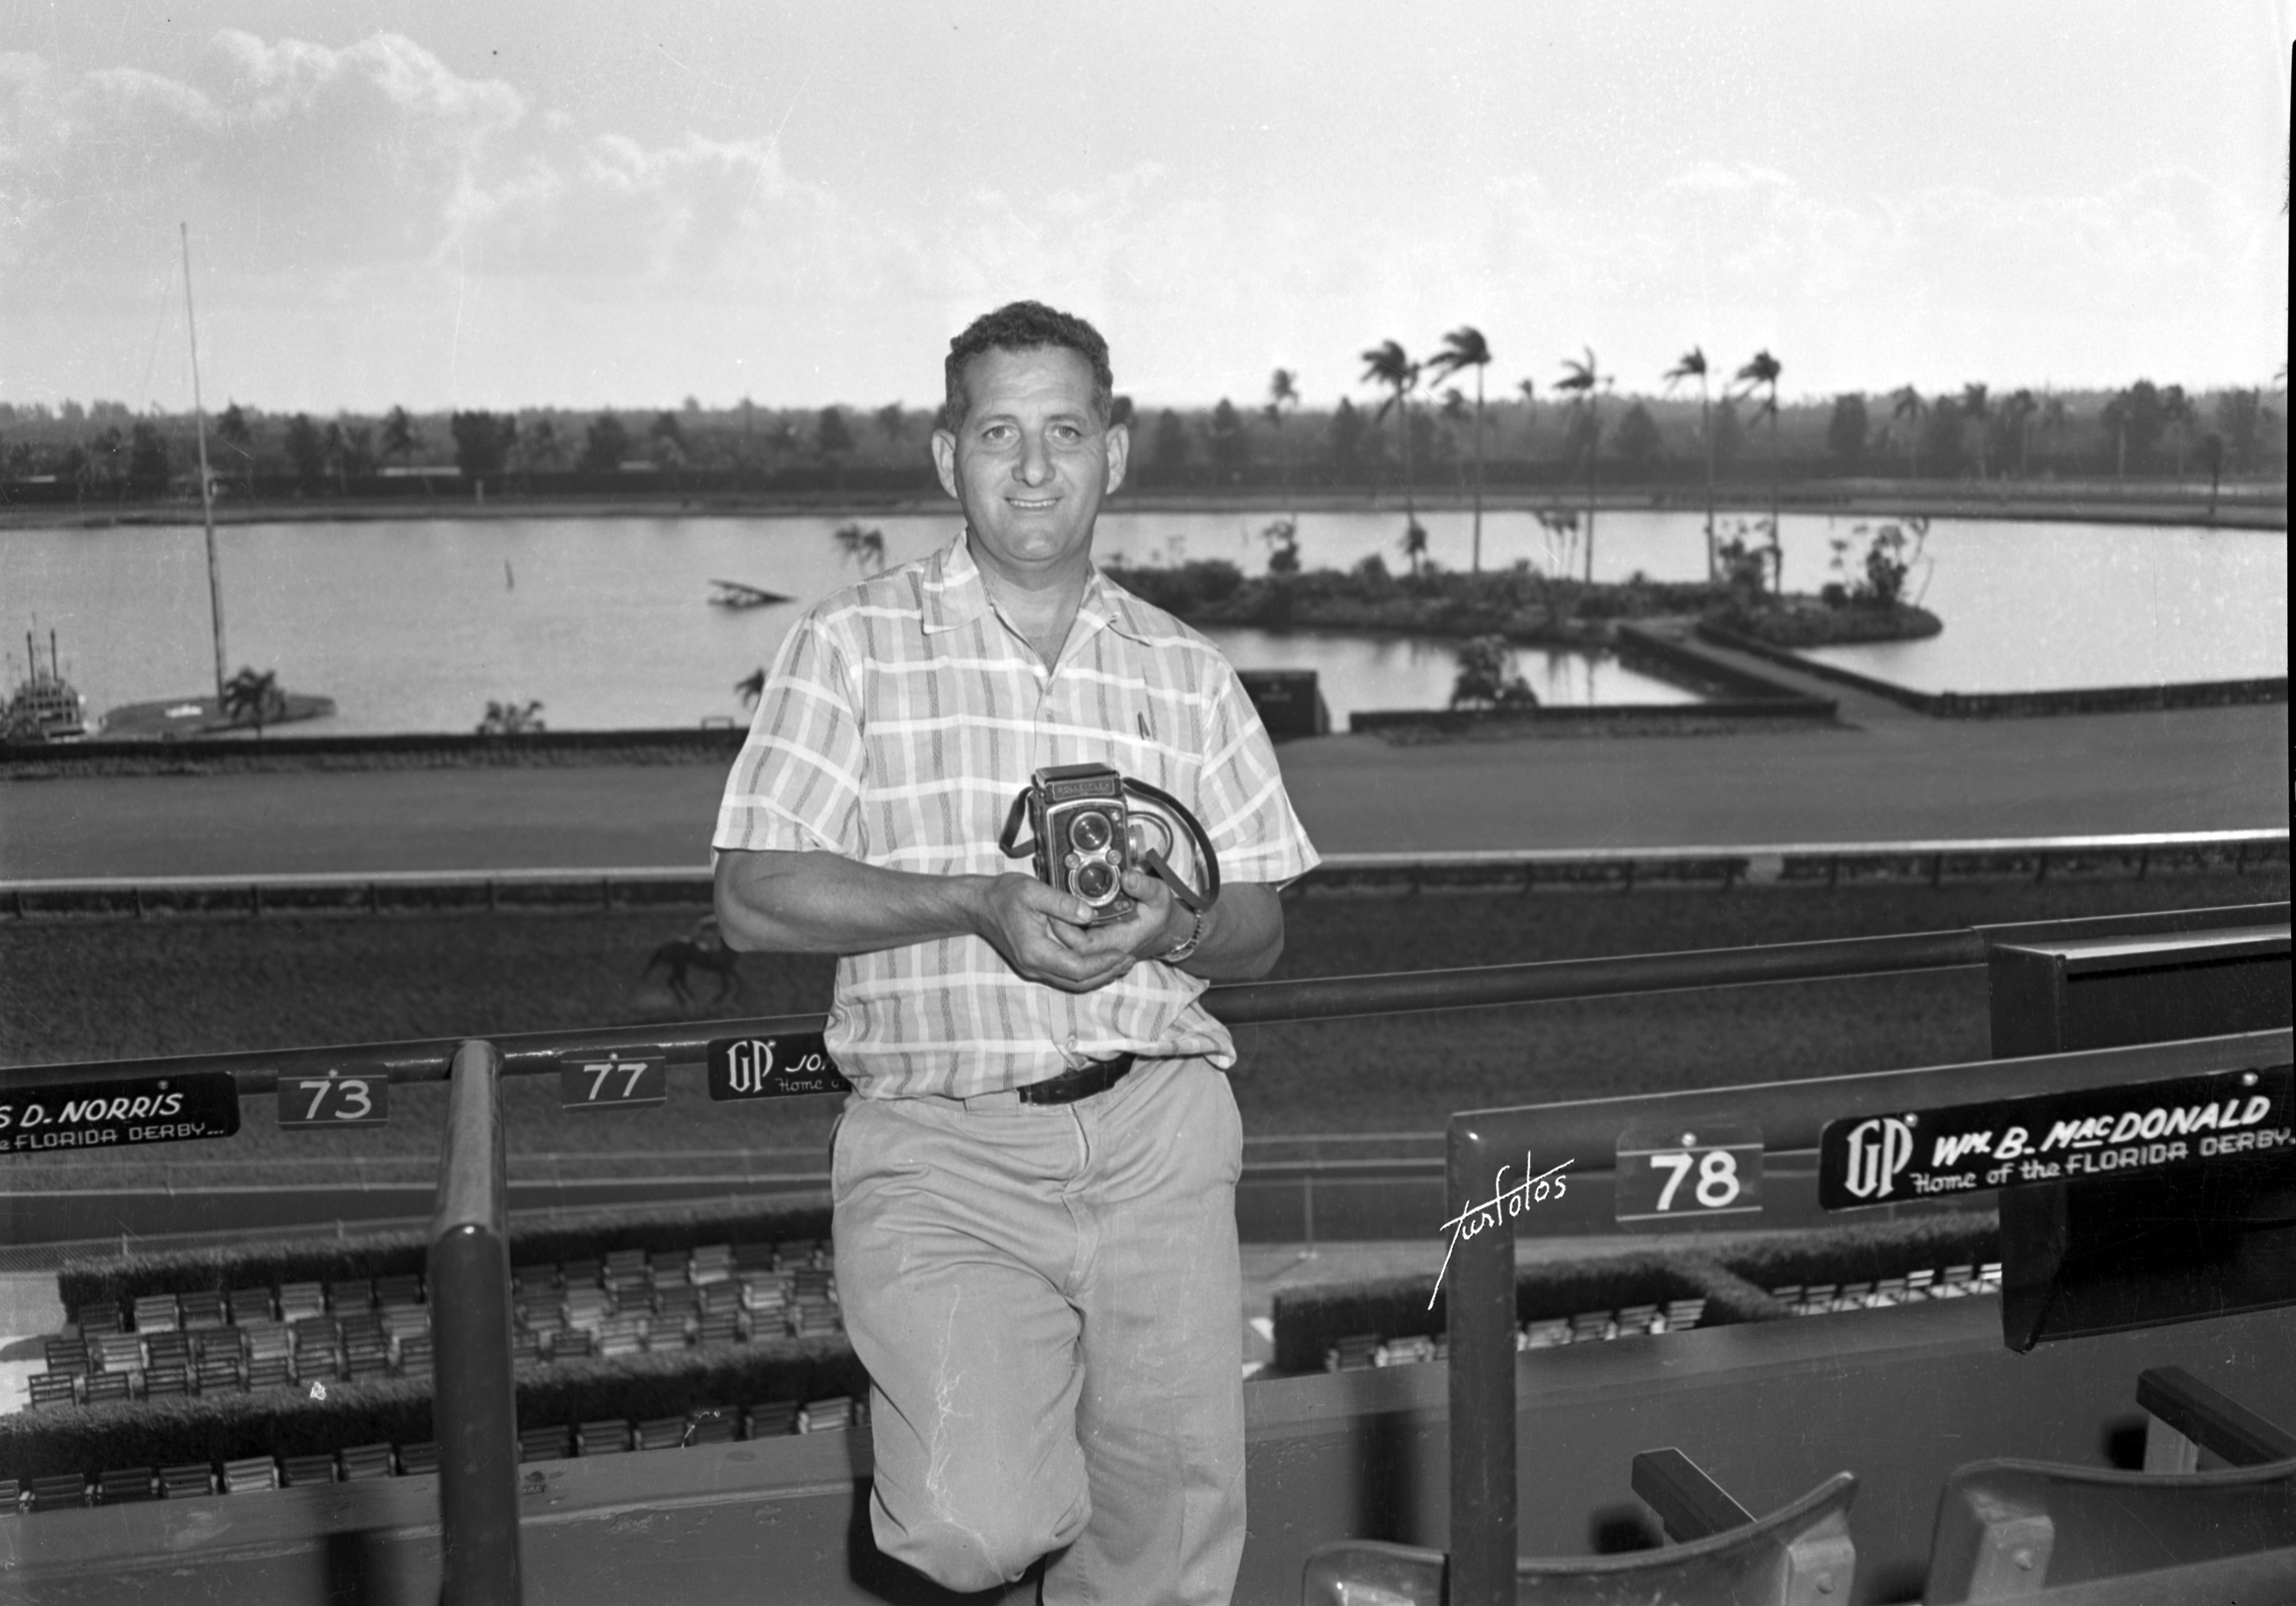 Jim Raftery at Gulfstream Park, date unknown (Turfotos image)